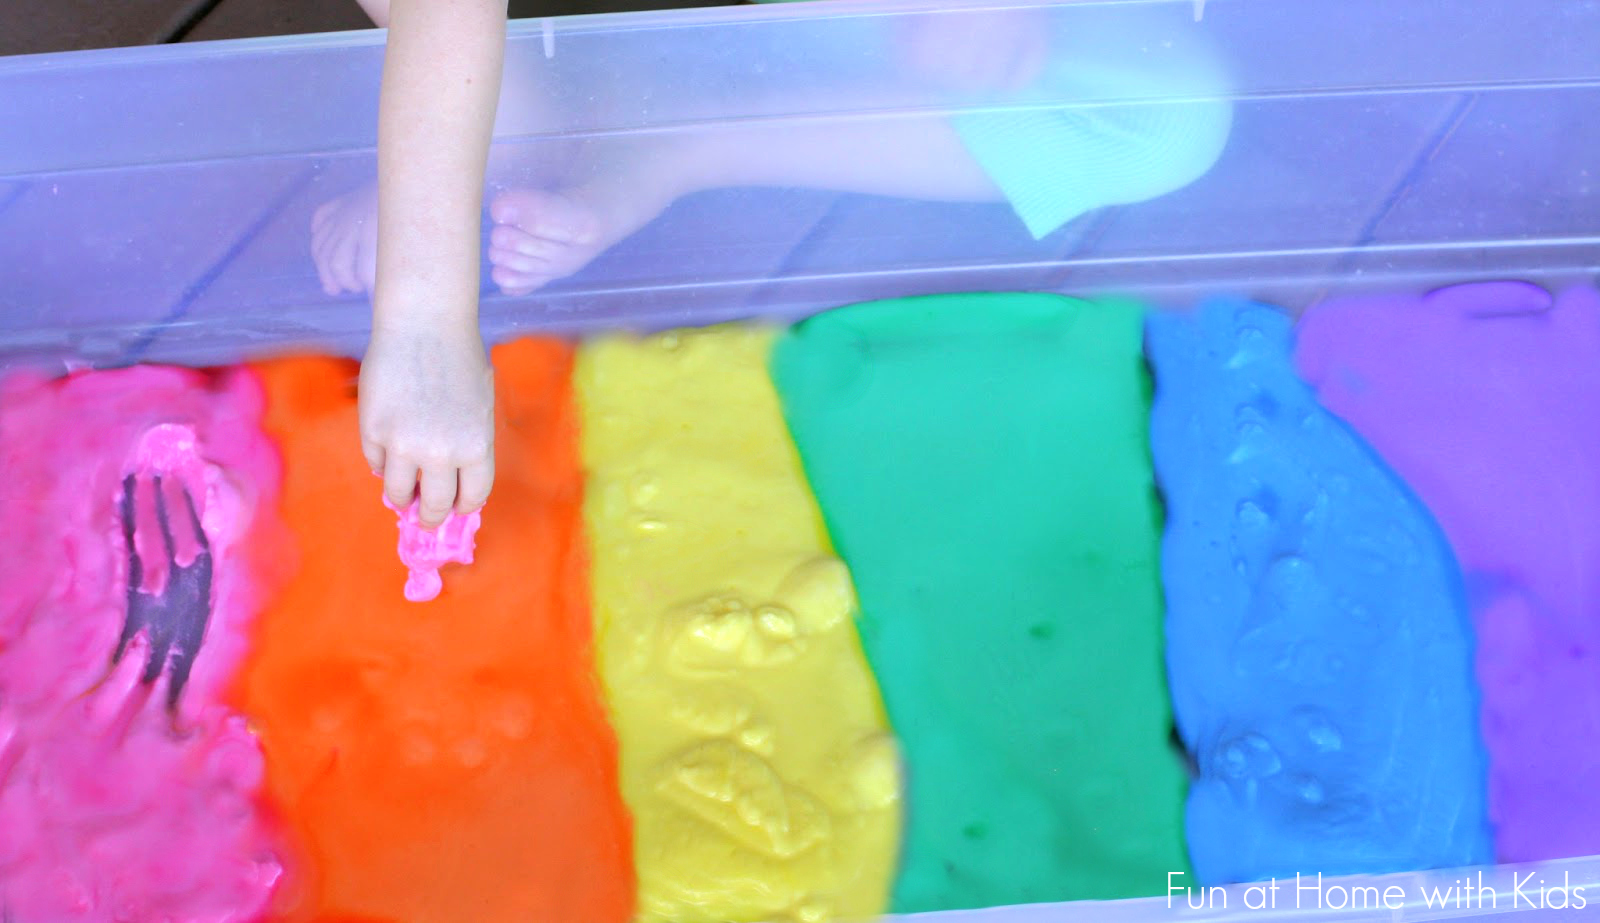 Fizzy Rainbow Slush - a beautiful sensory experience from Fun at Home with Kids